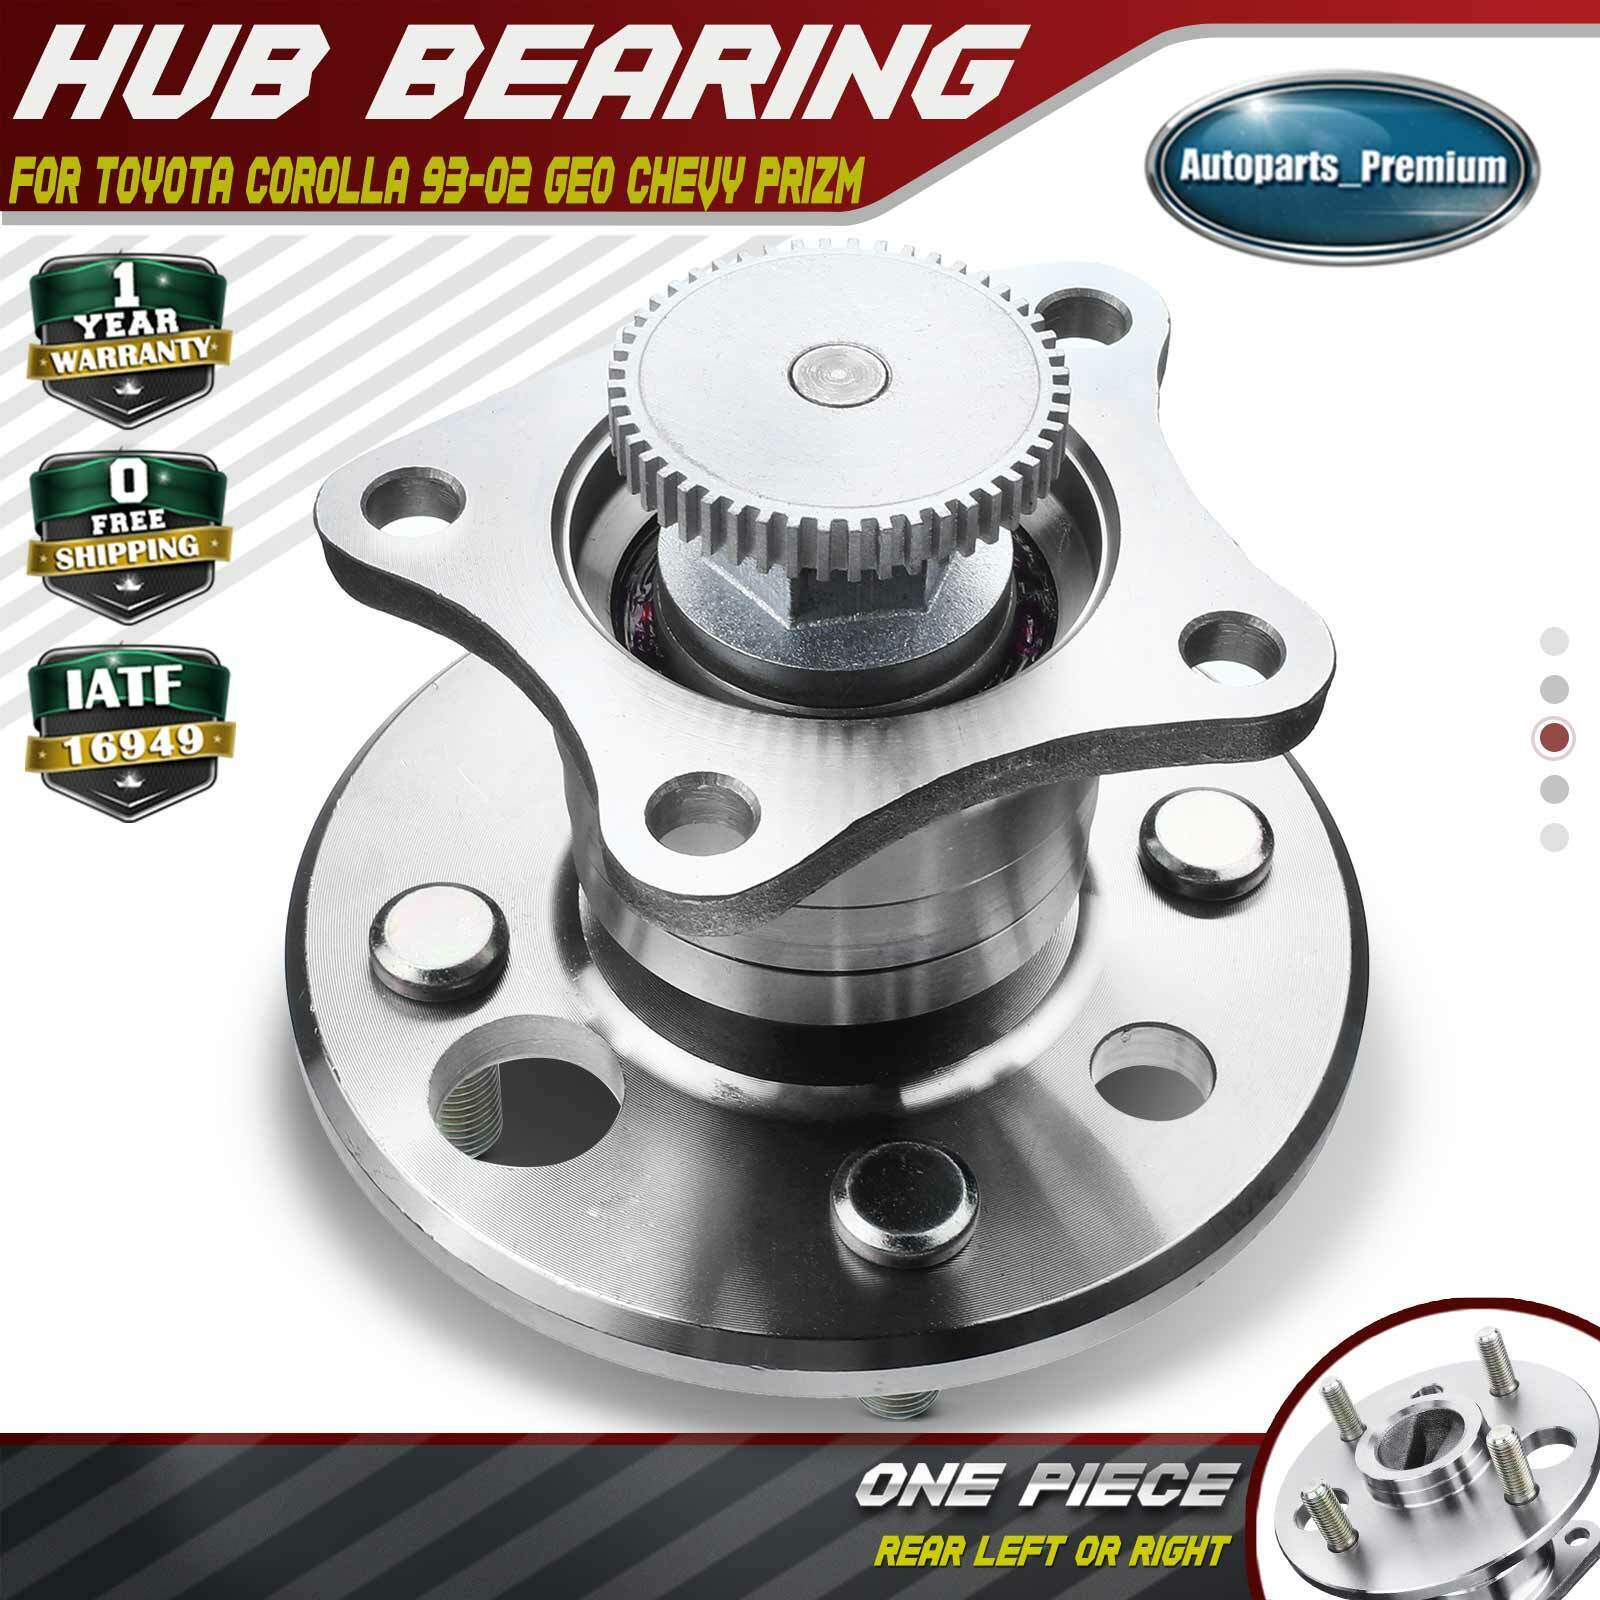 1x Rear LH or RH Wheel Bearing Hub Assembly for Toyota Corolla 93-02 Chevy Prizm